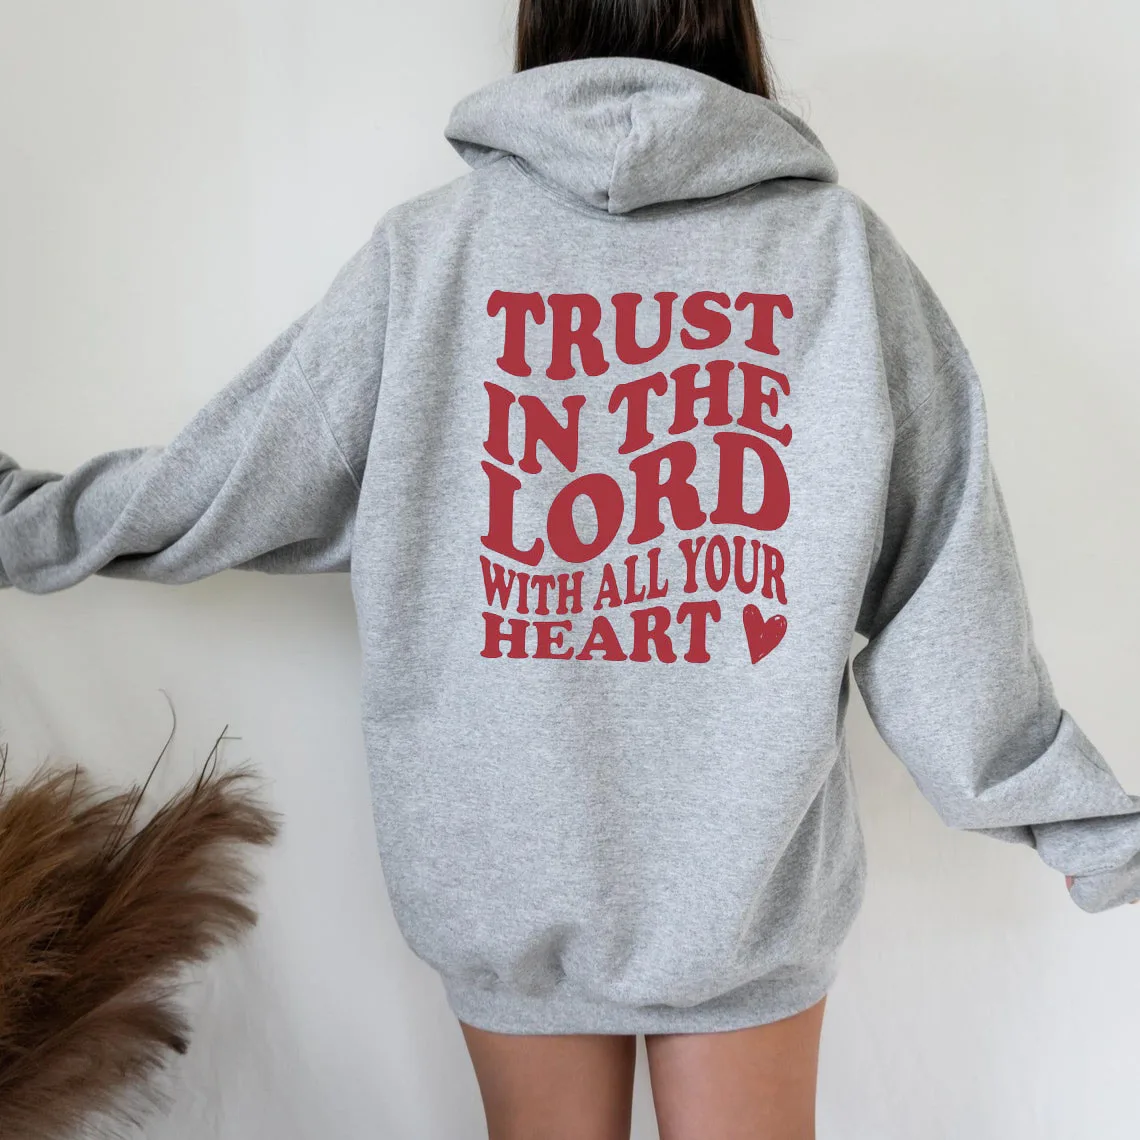 Trust in the Lord Trendy Jesus Hoodie Aesthetic religion church Christian Bible baptism pullovers youngs hipster vintage tops